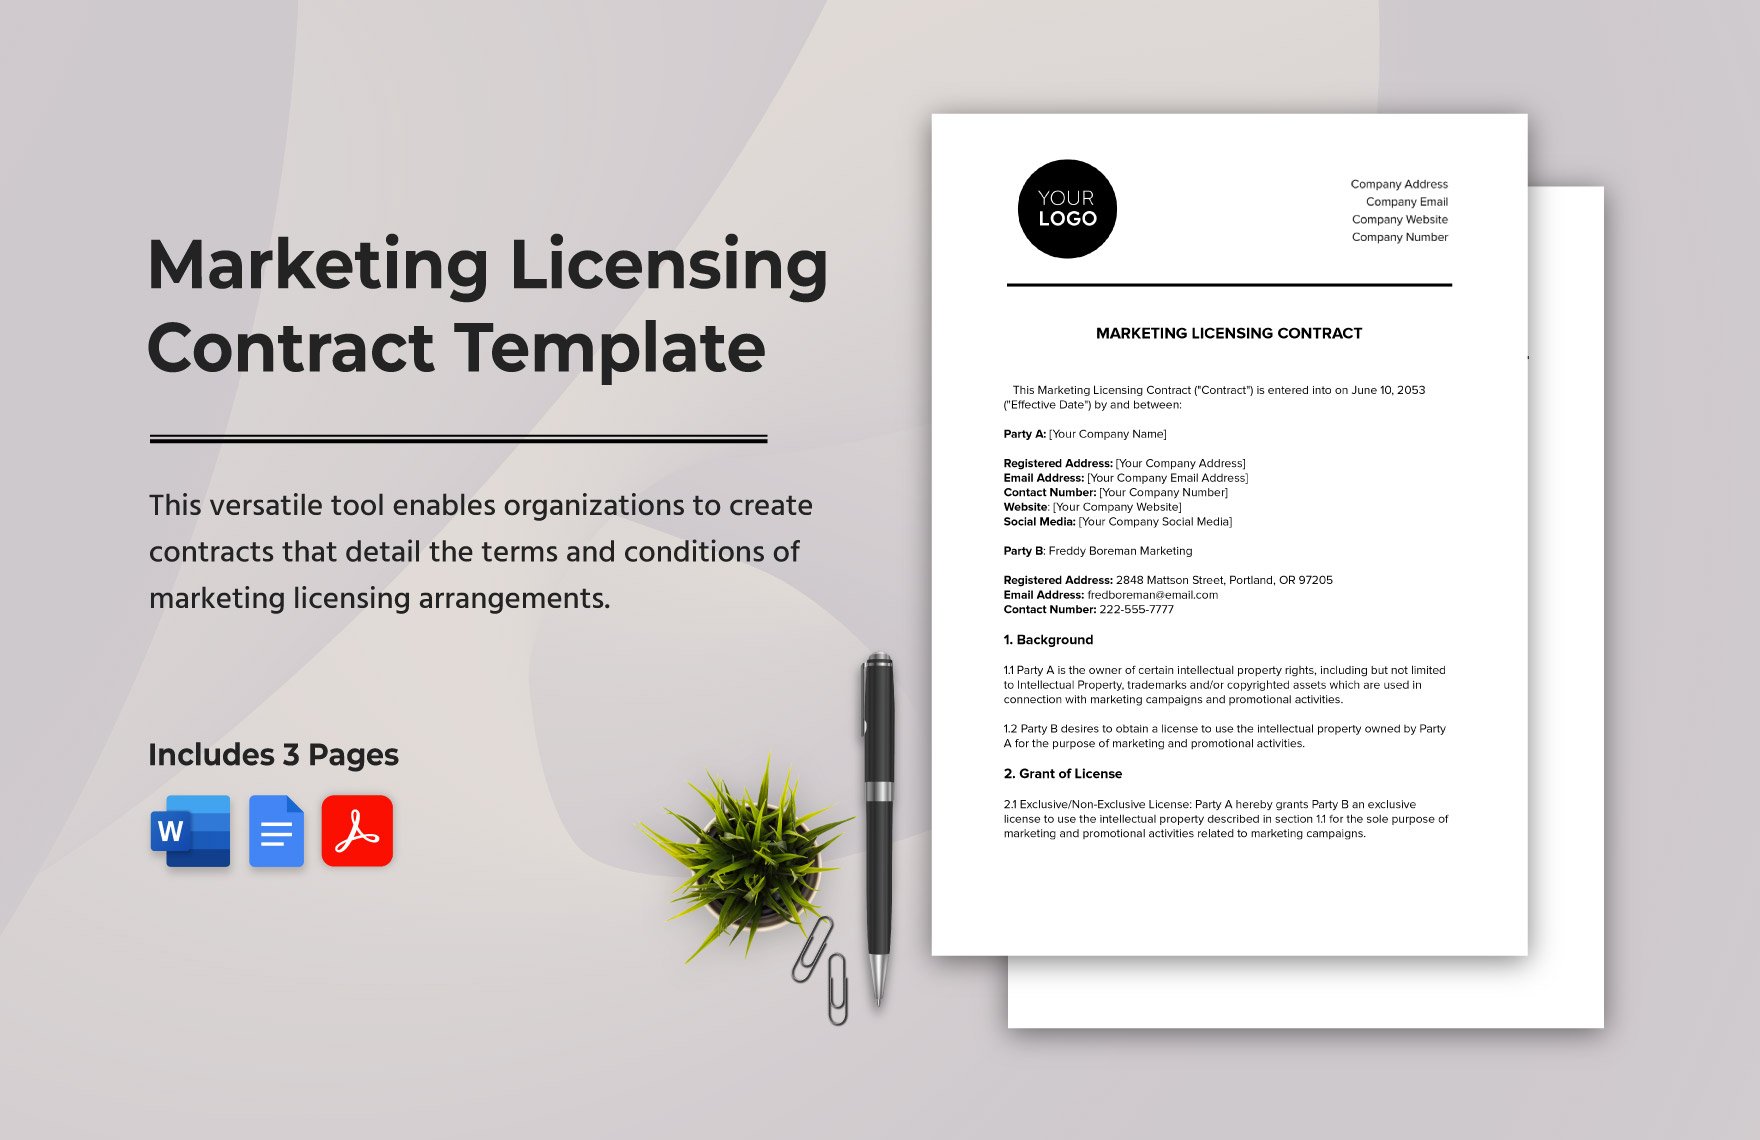 Marketing Licensing Contract Template in Word, Google Docs, PDF